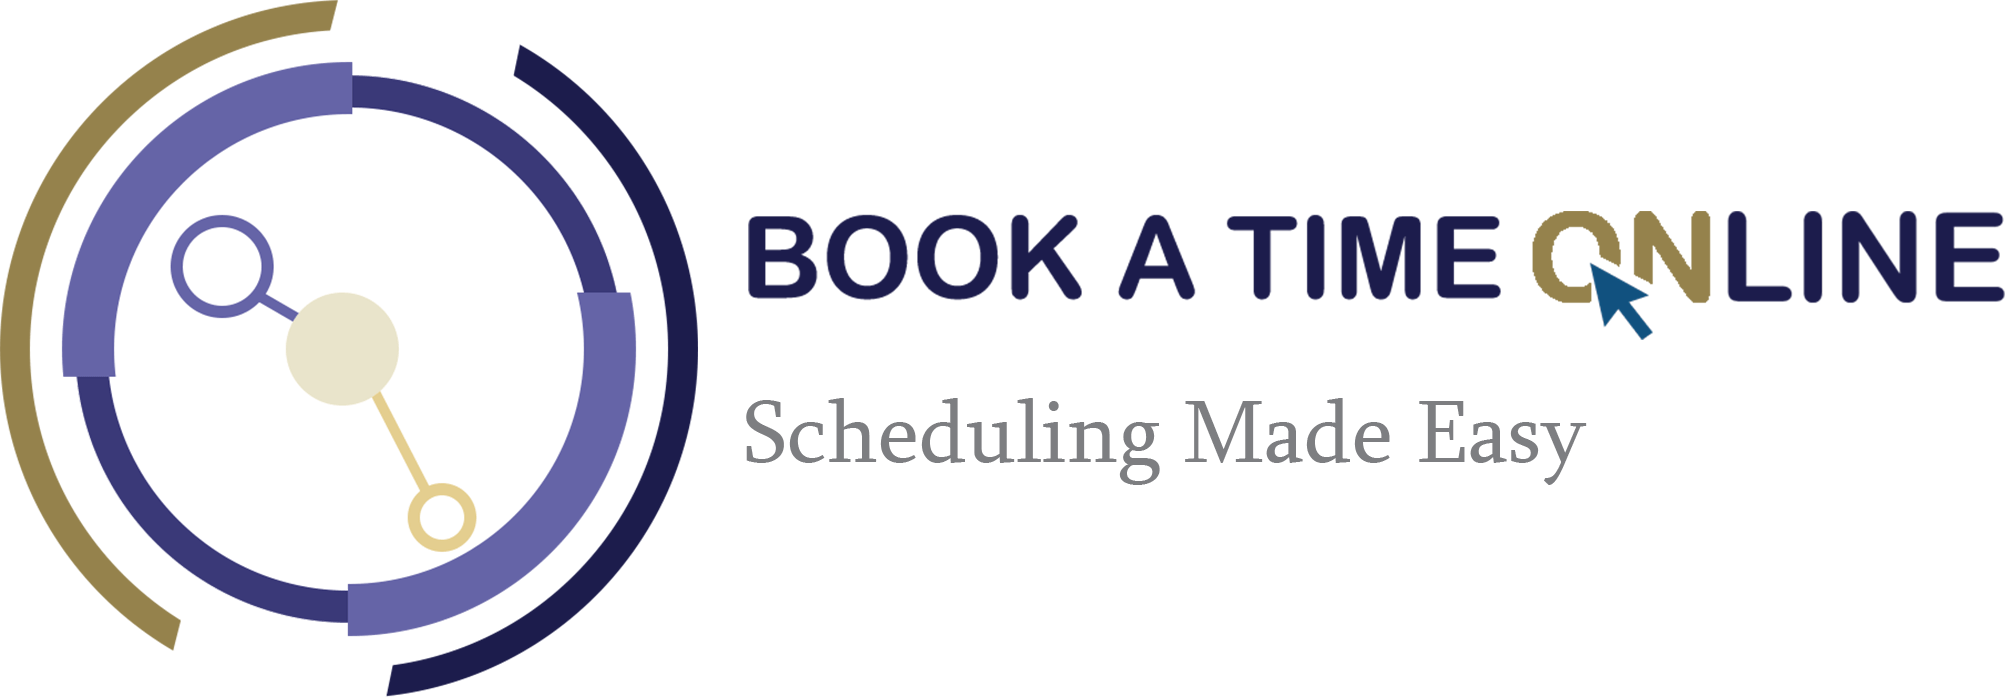 Book A Time Online - Timetable Made Simple